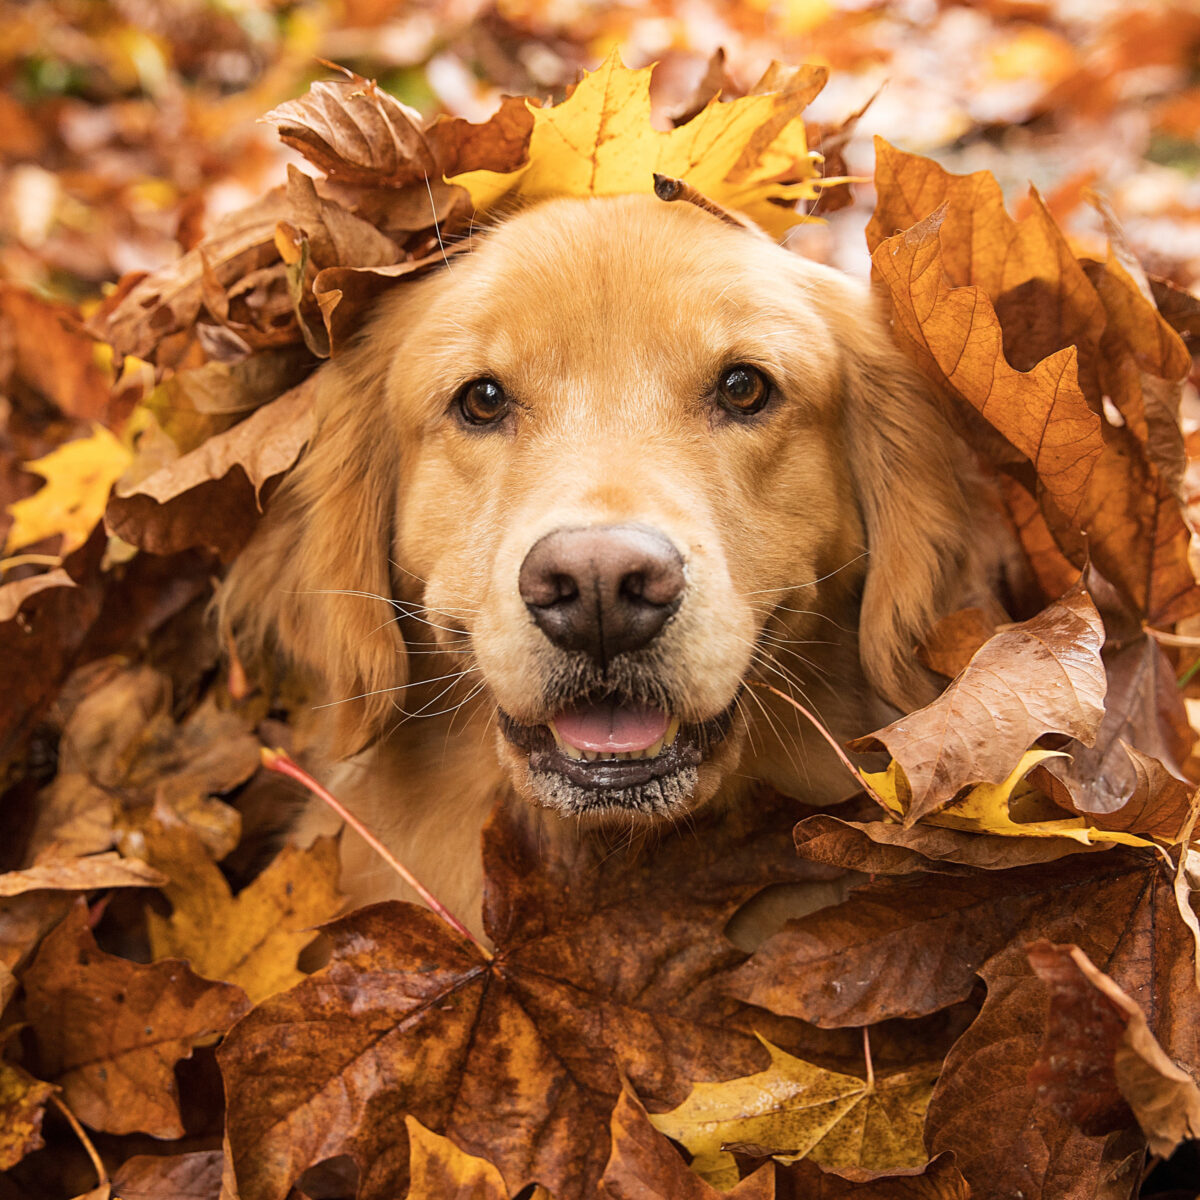 The dogs of October in images